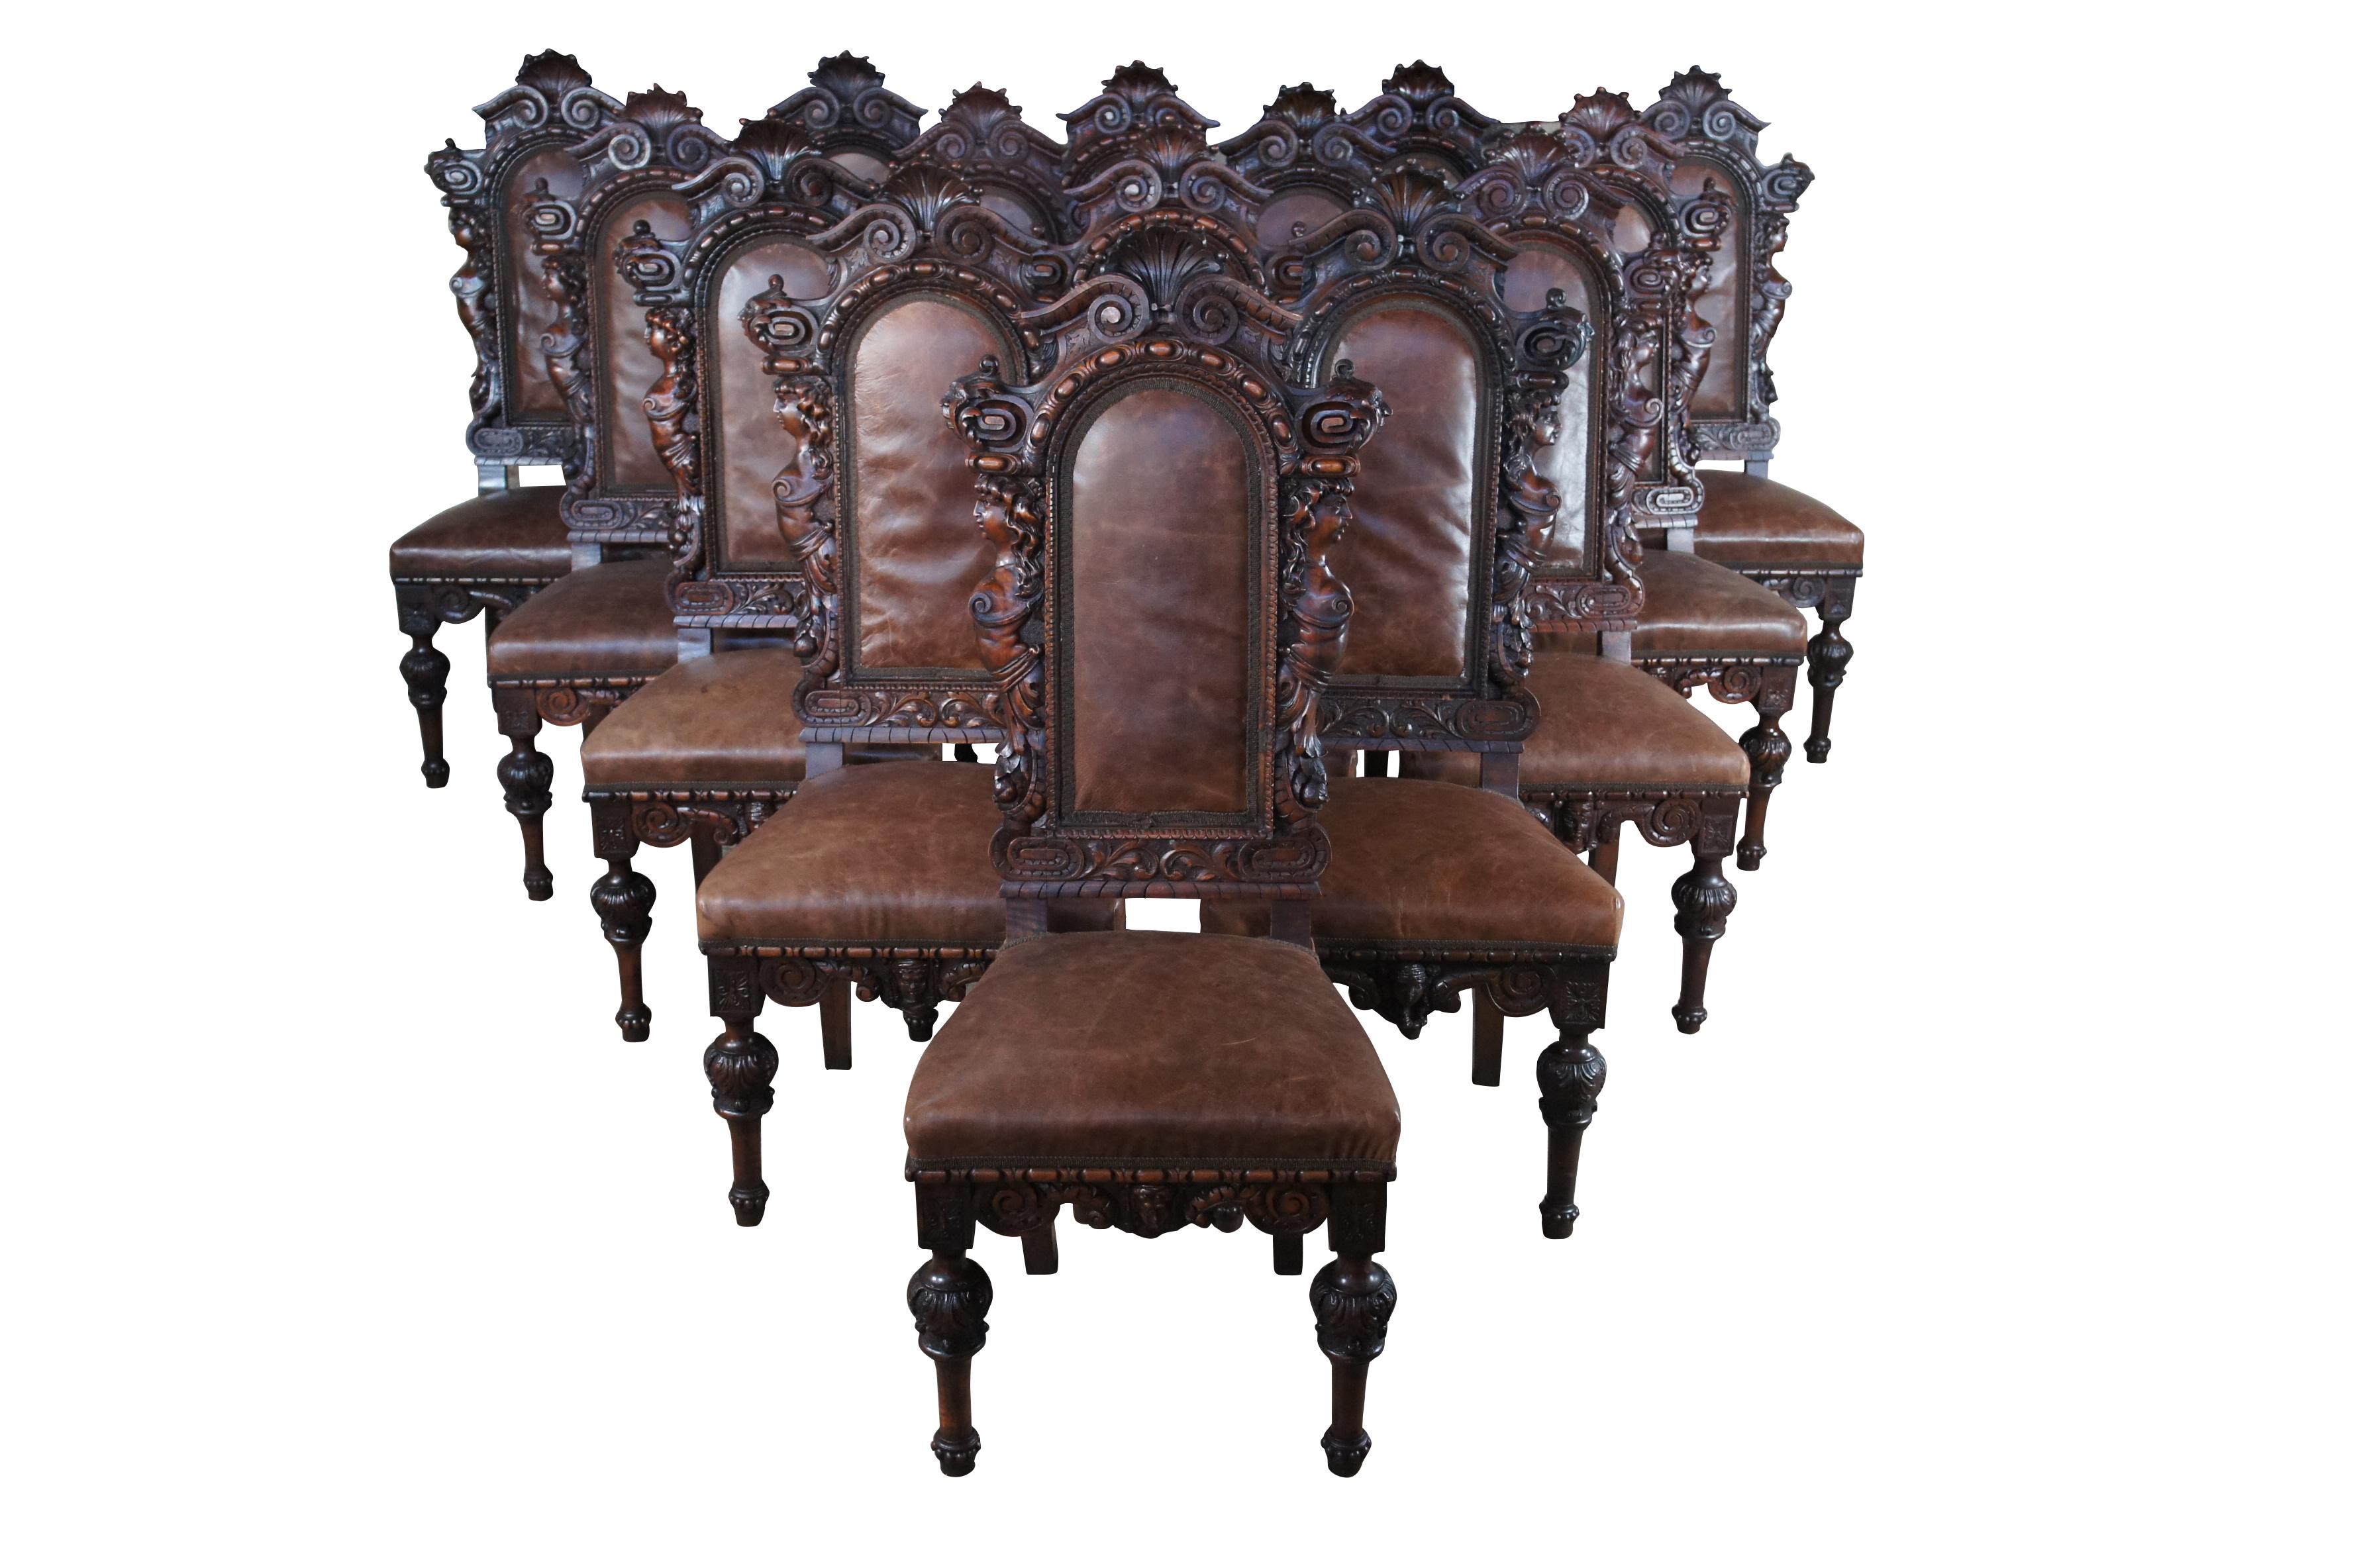 Exceedingly Rare Italian Renaissance Revival style high back mahogany dining chairs, circa 1850-1870s. Each chair is hand carved with an arched and scrolled high back centered by a scalloped shell. The sides showcase figural high relief maidens